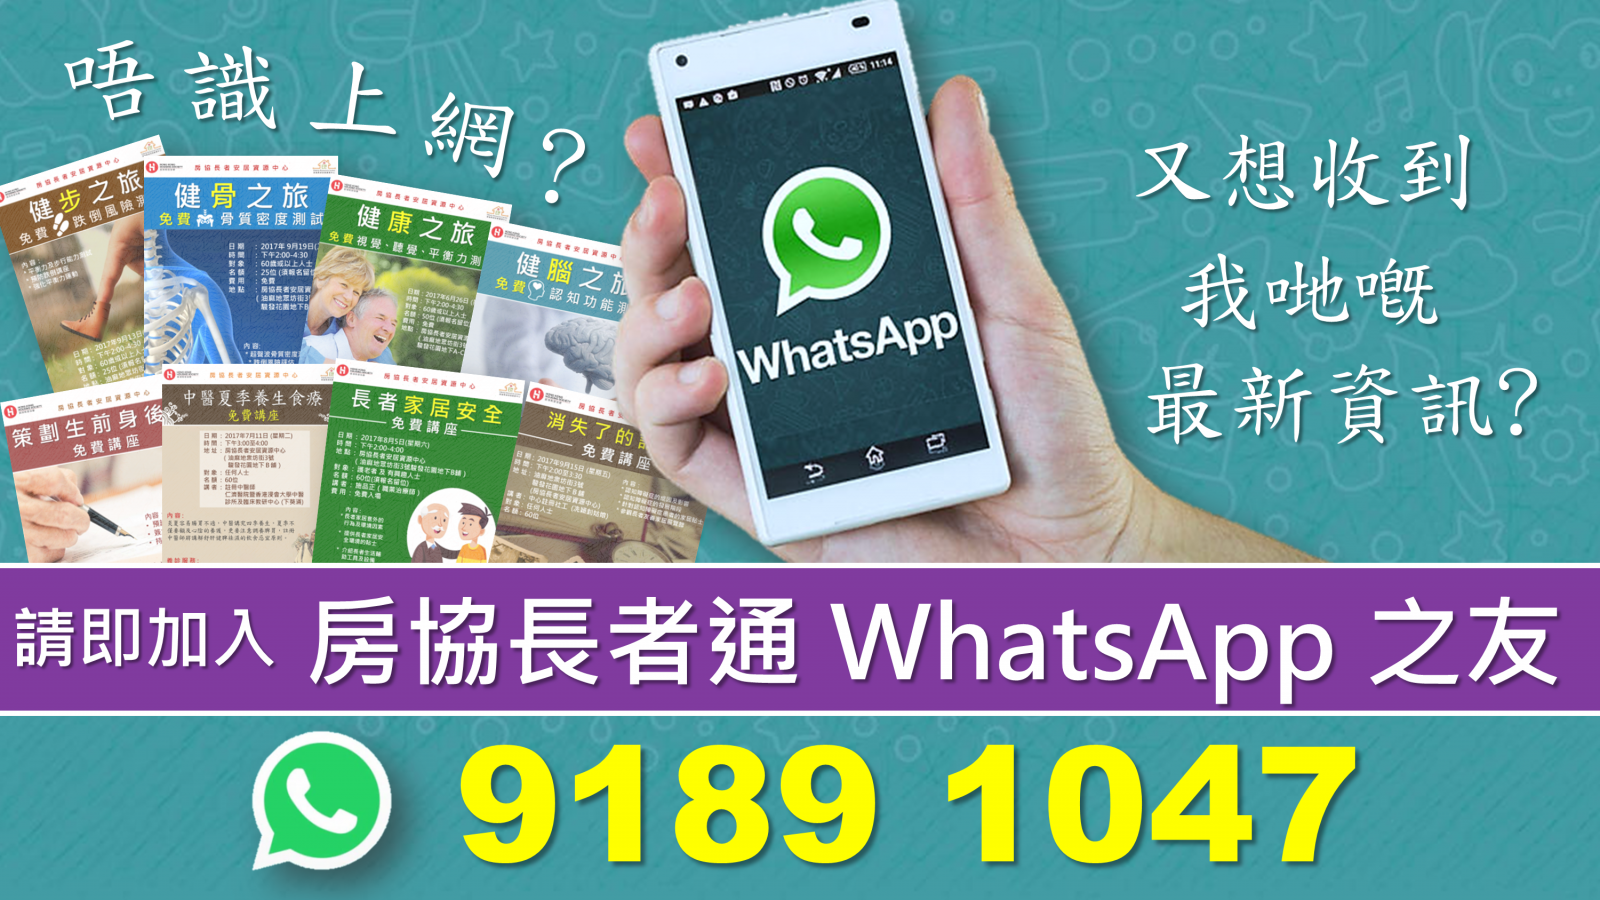 2019-03-27 WhatsApp broadcasting service launched